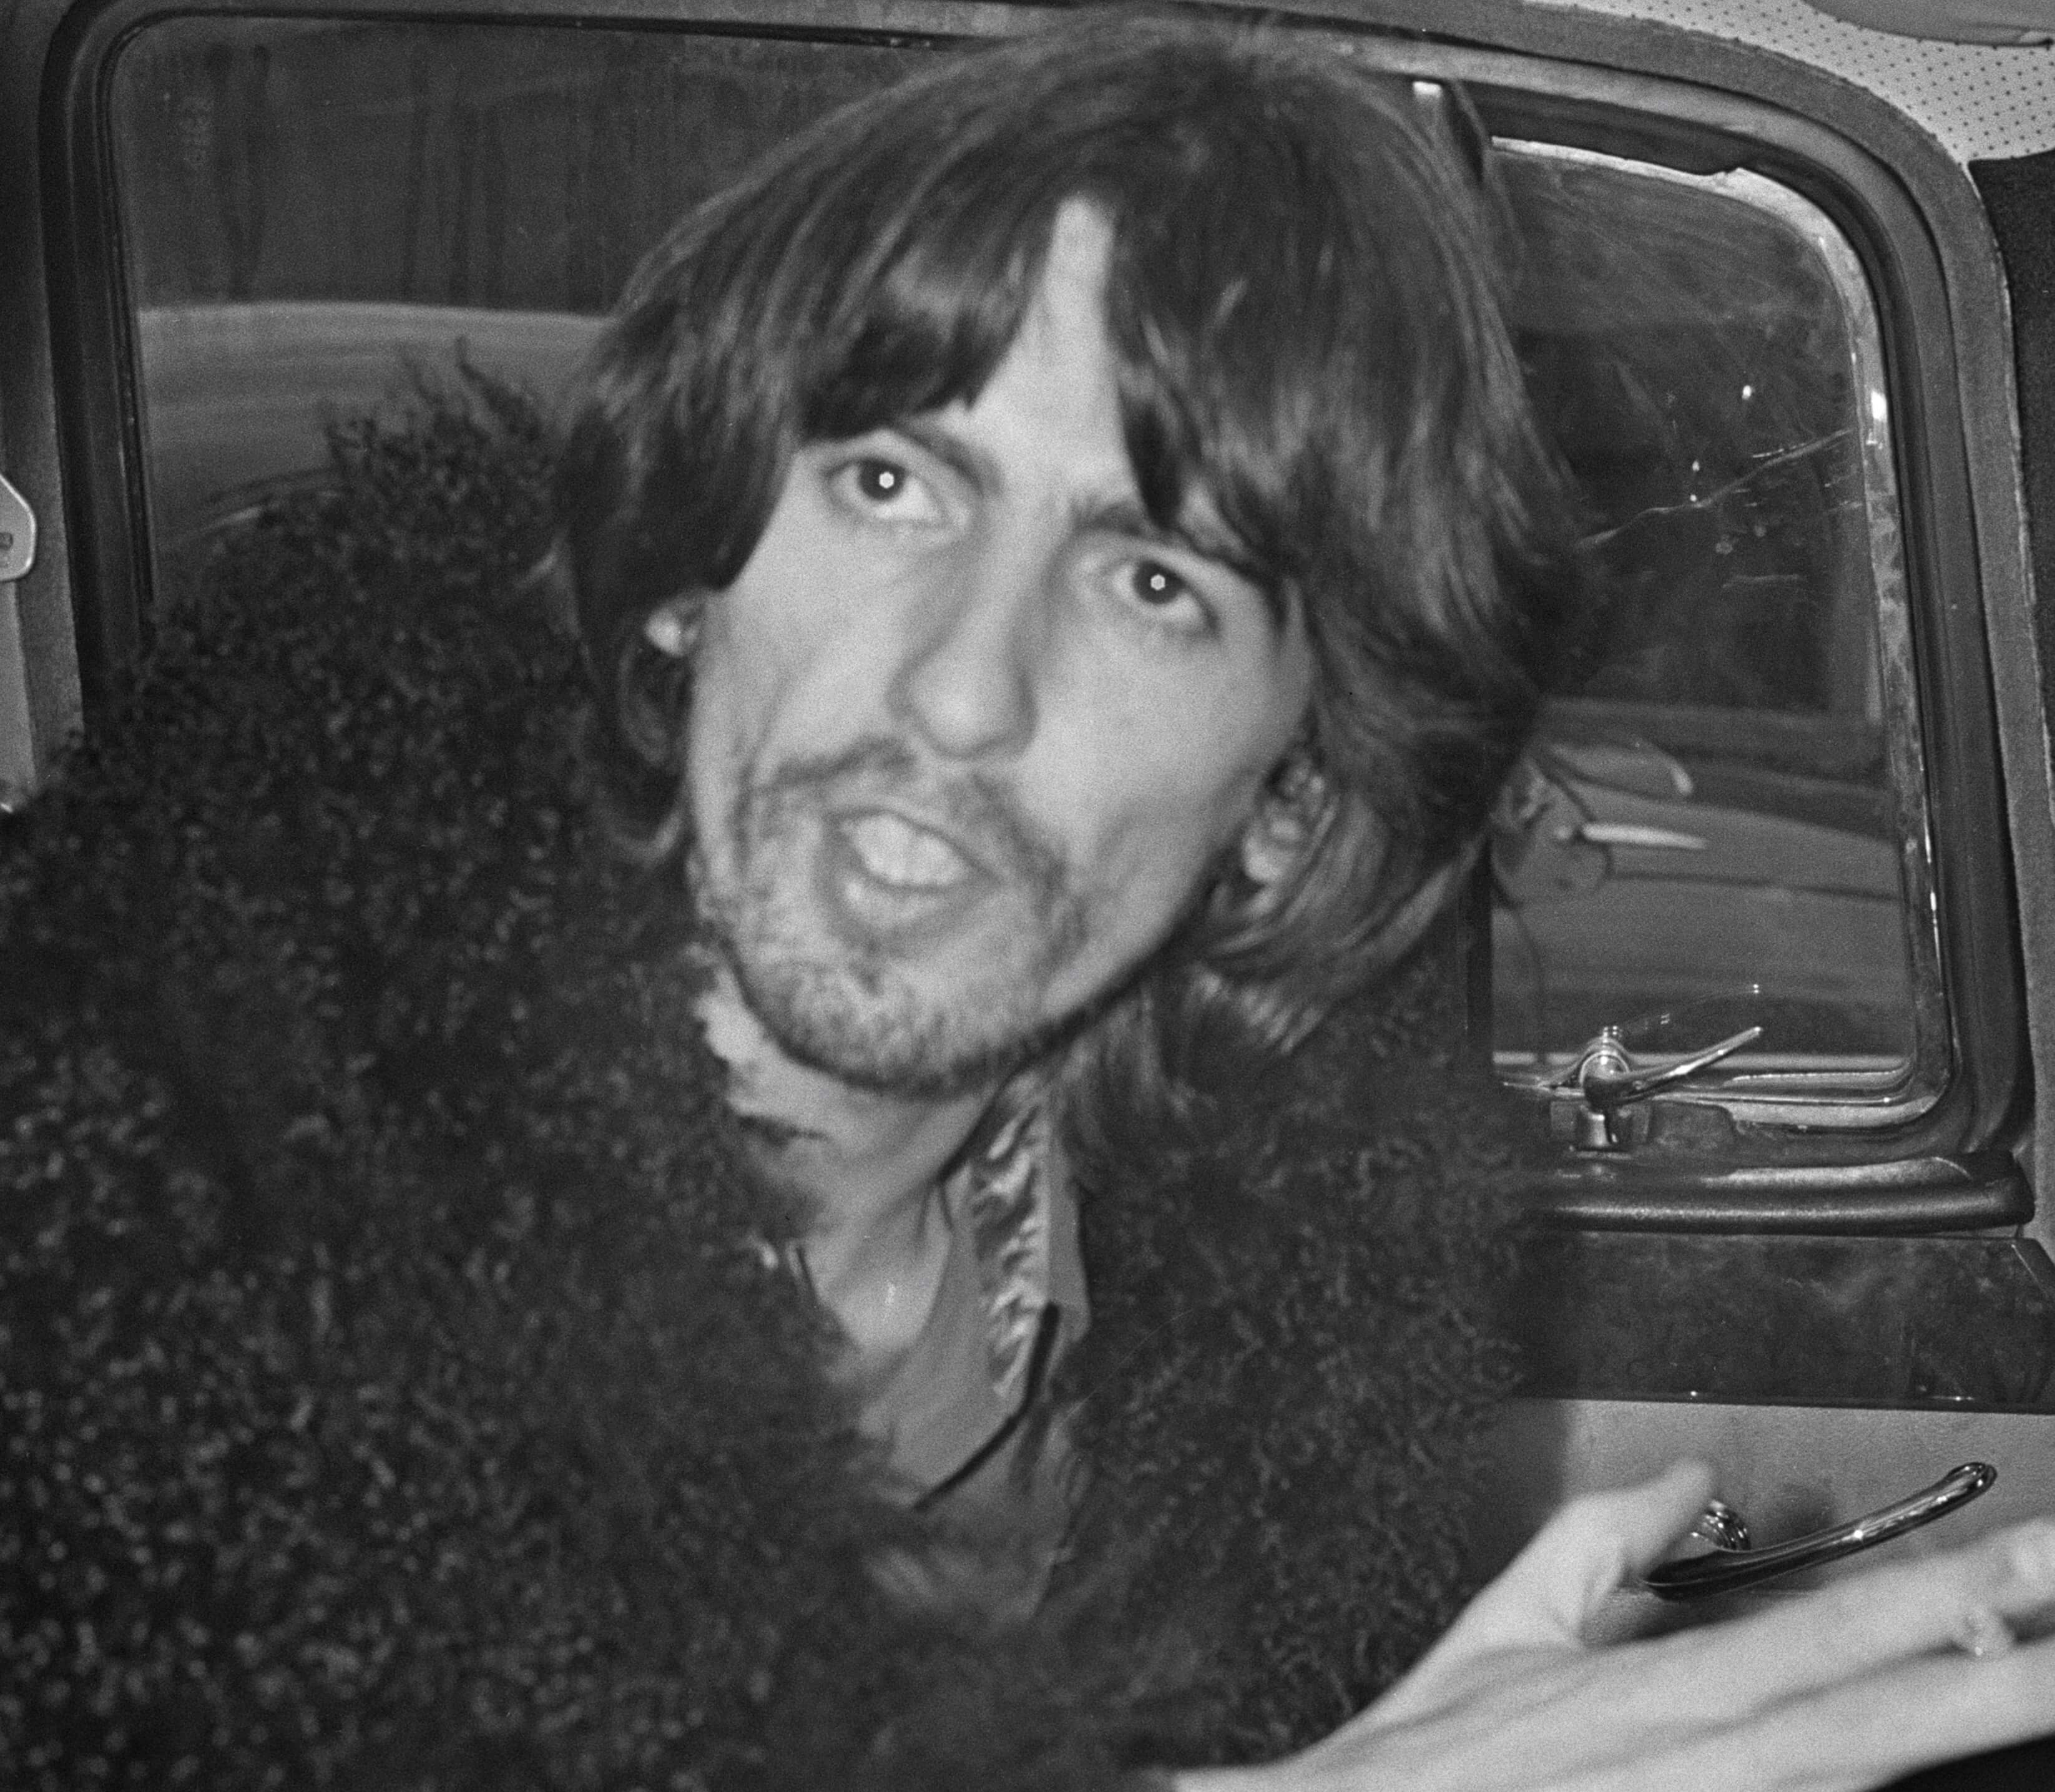 George Harrison, writer of The Beatles' "Here Comes the Sun," in a car